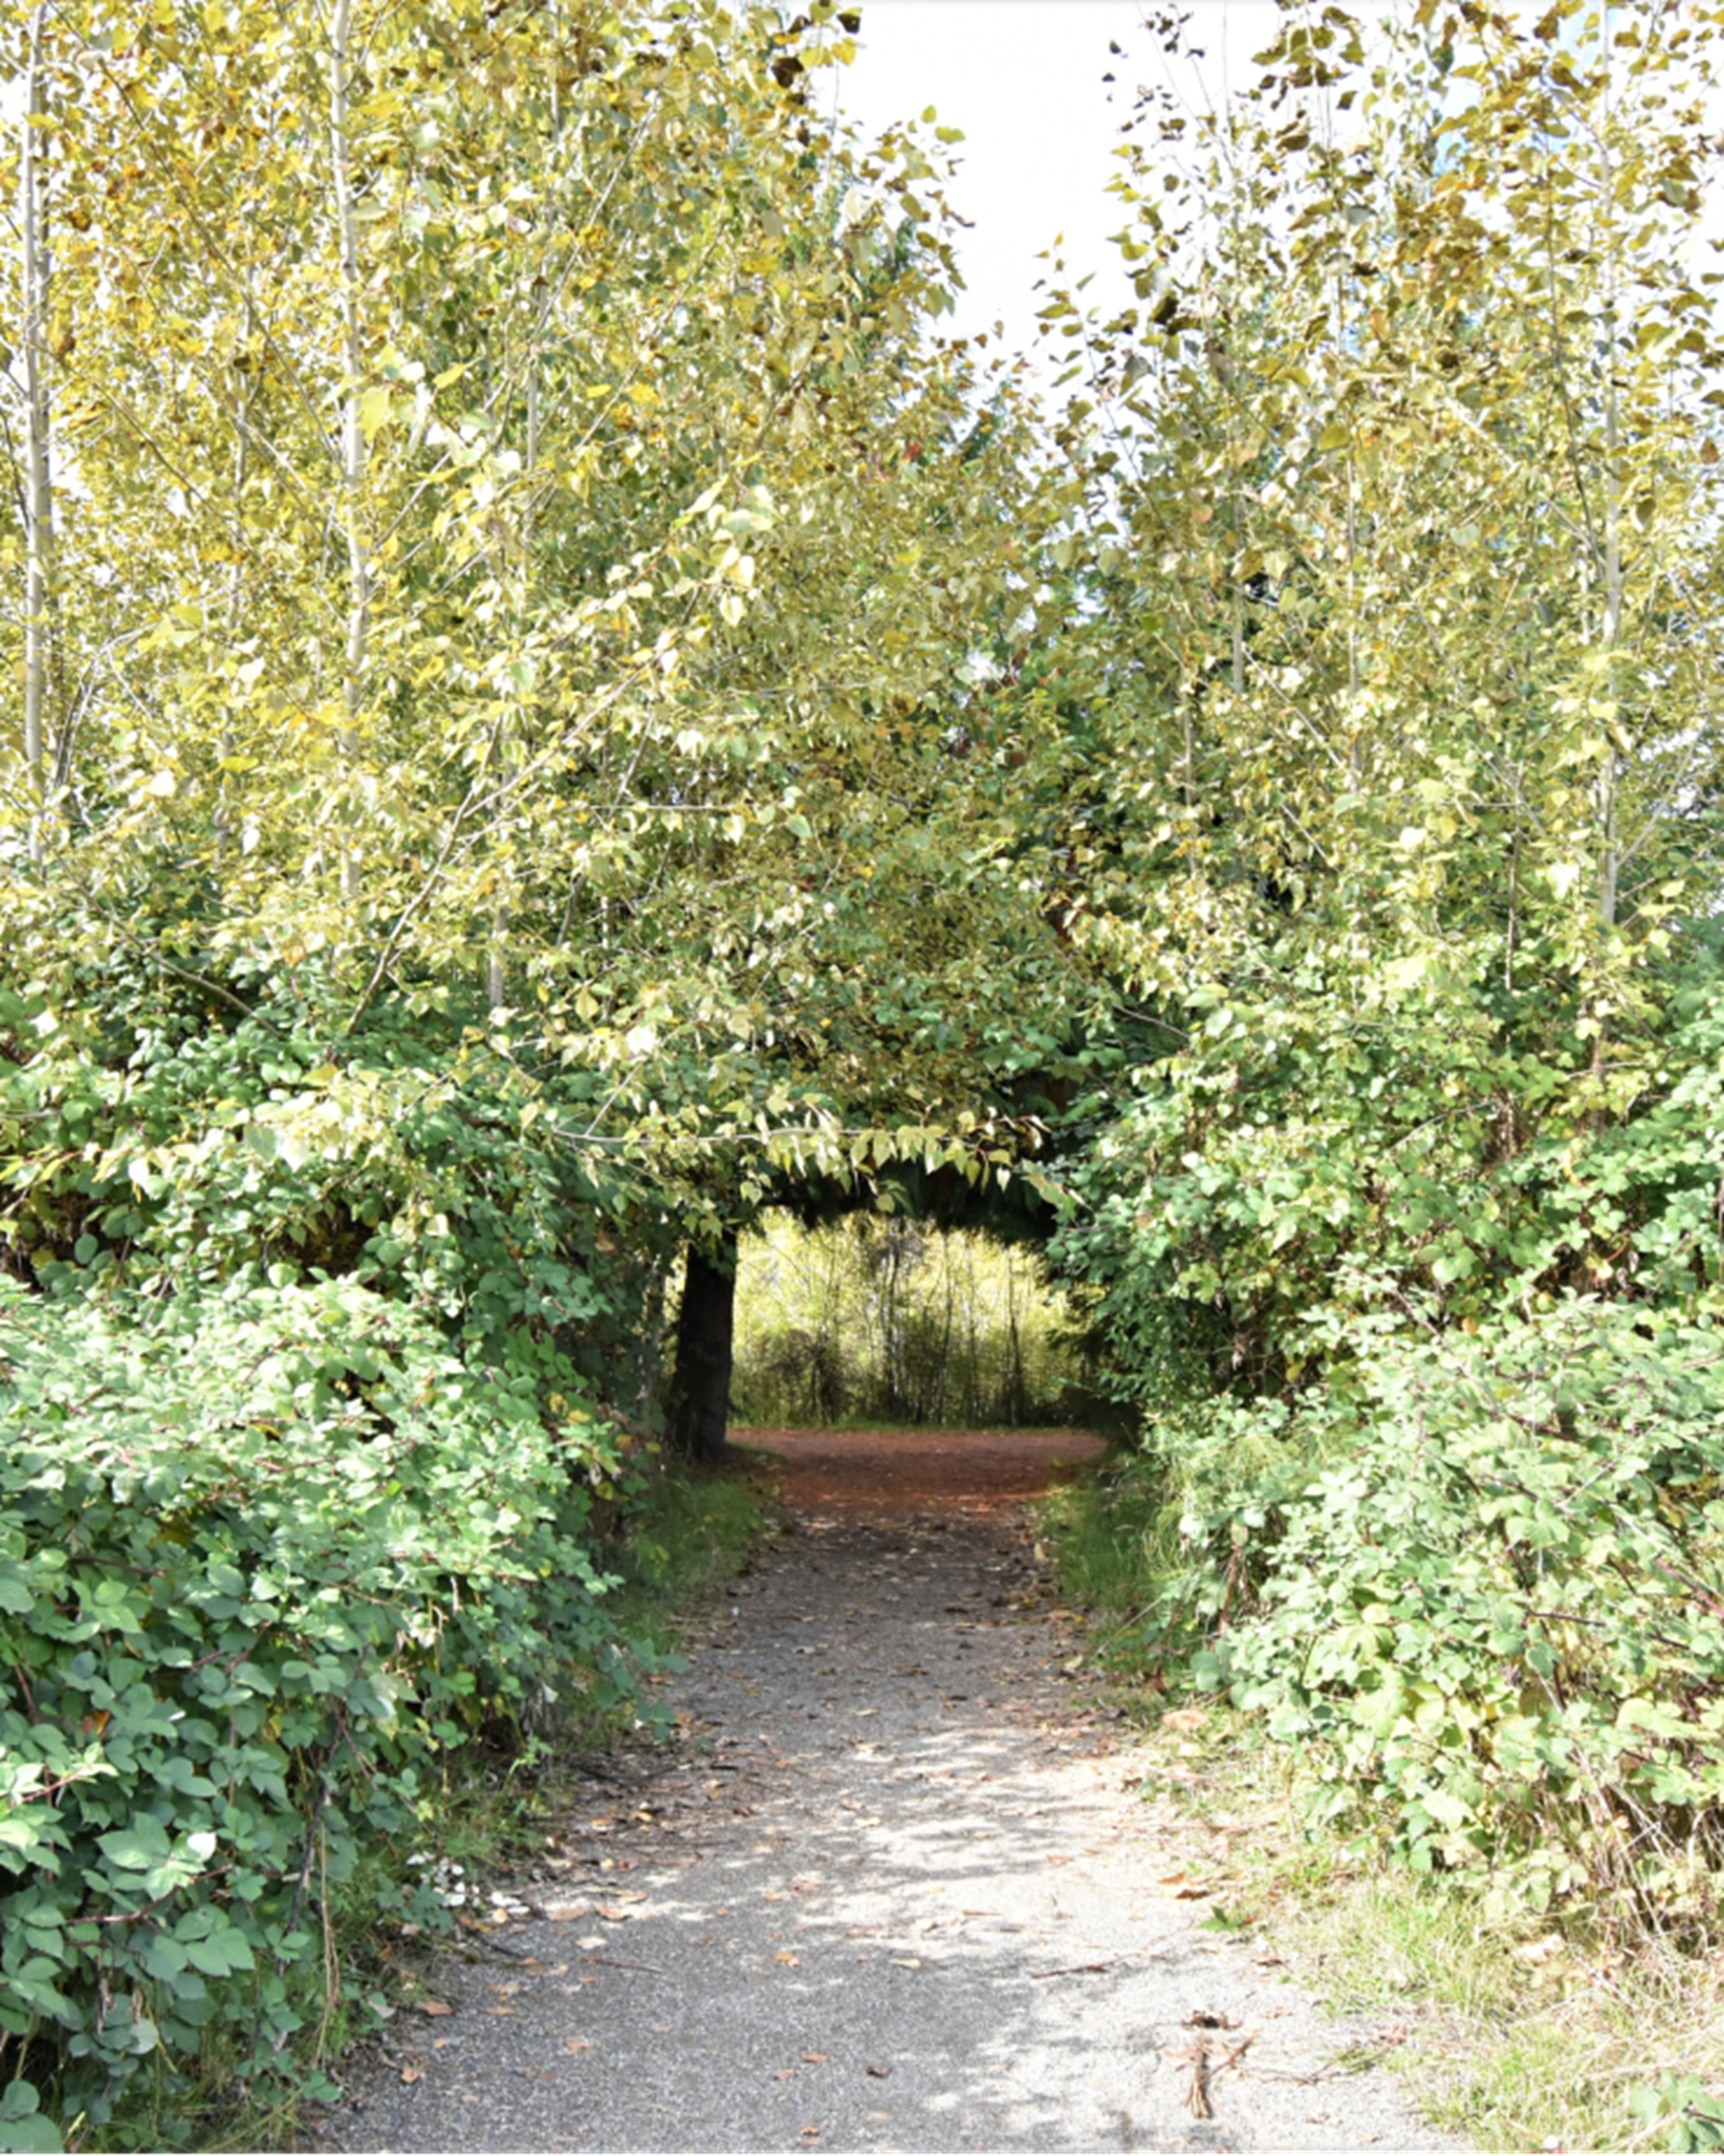 Forested path